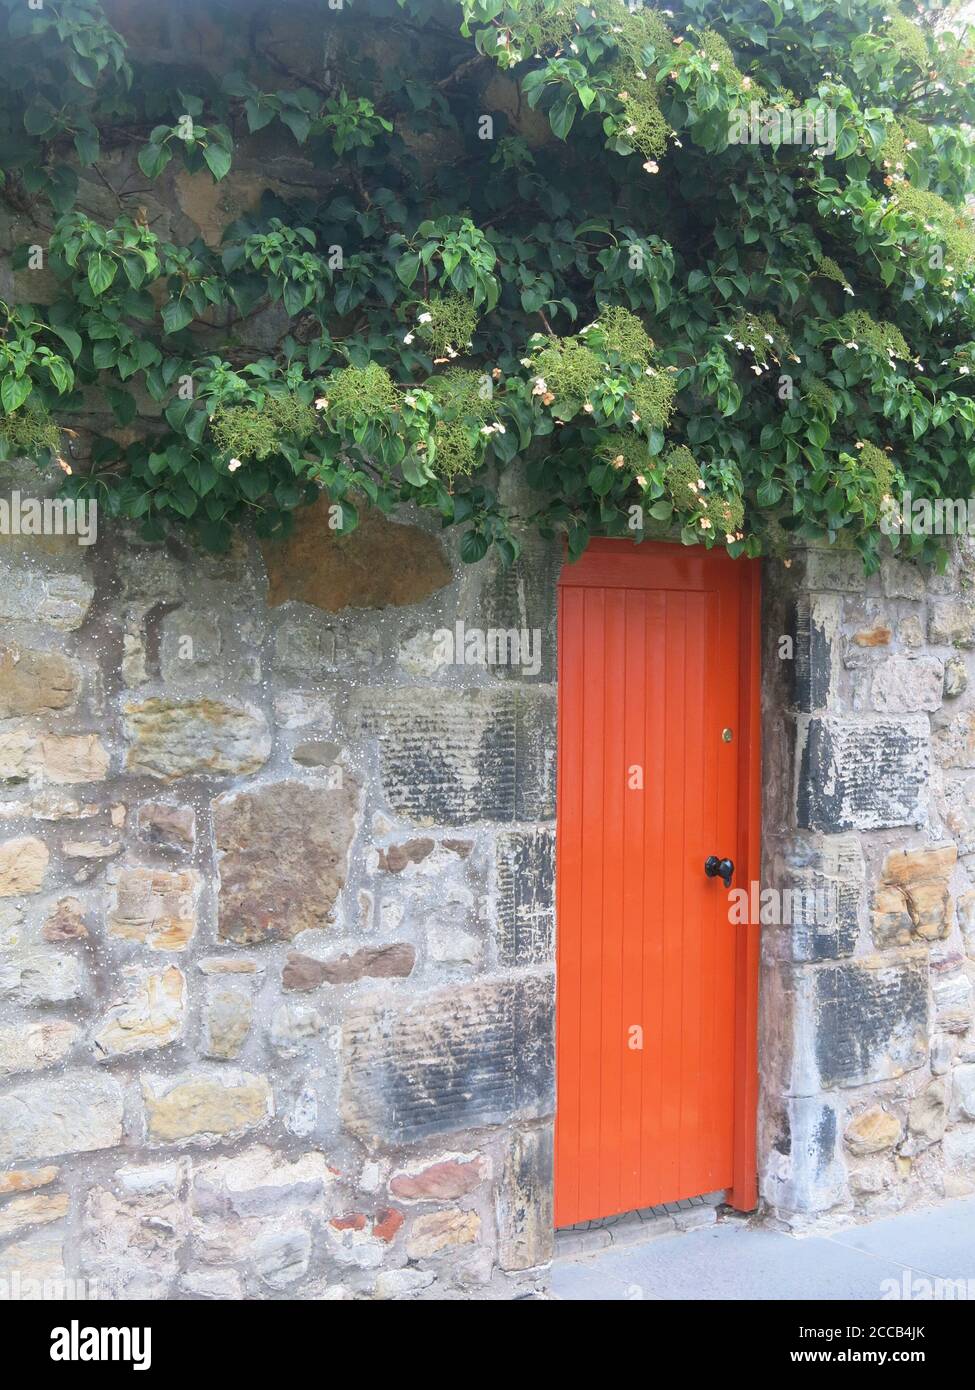 Behind closed doors: a brightly painted orange door in a stone wall, with mature shrubbery growing up above; St Andrews street scene, August 2020 Stock Photo